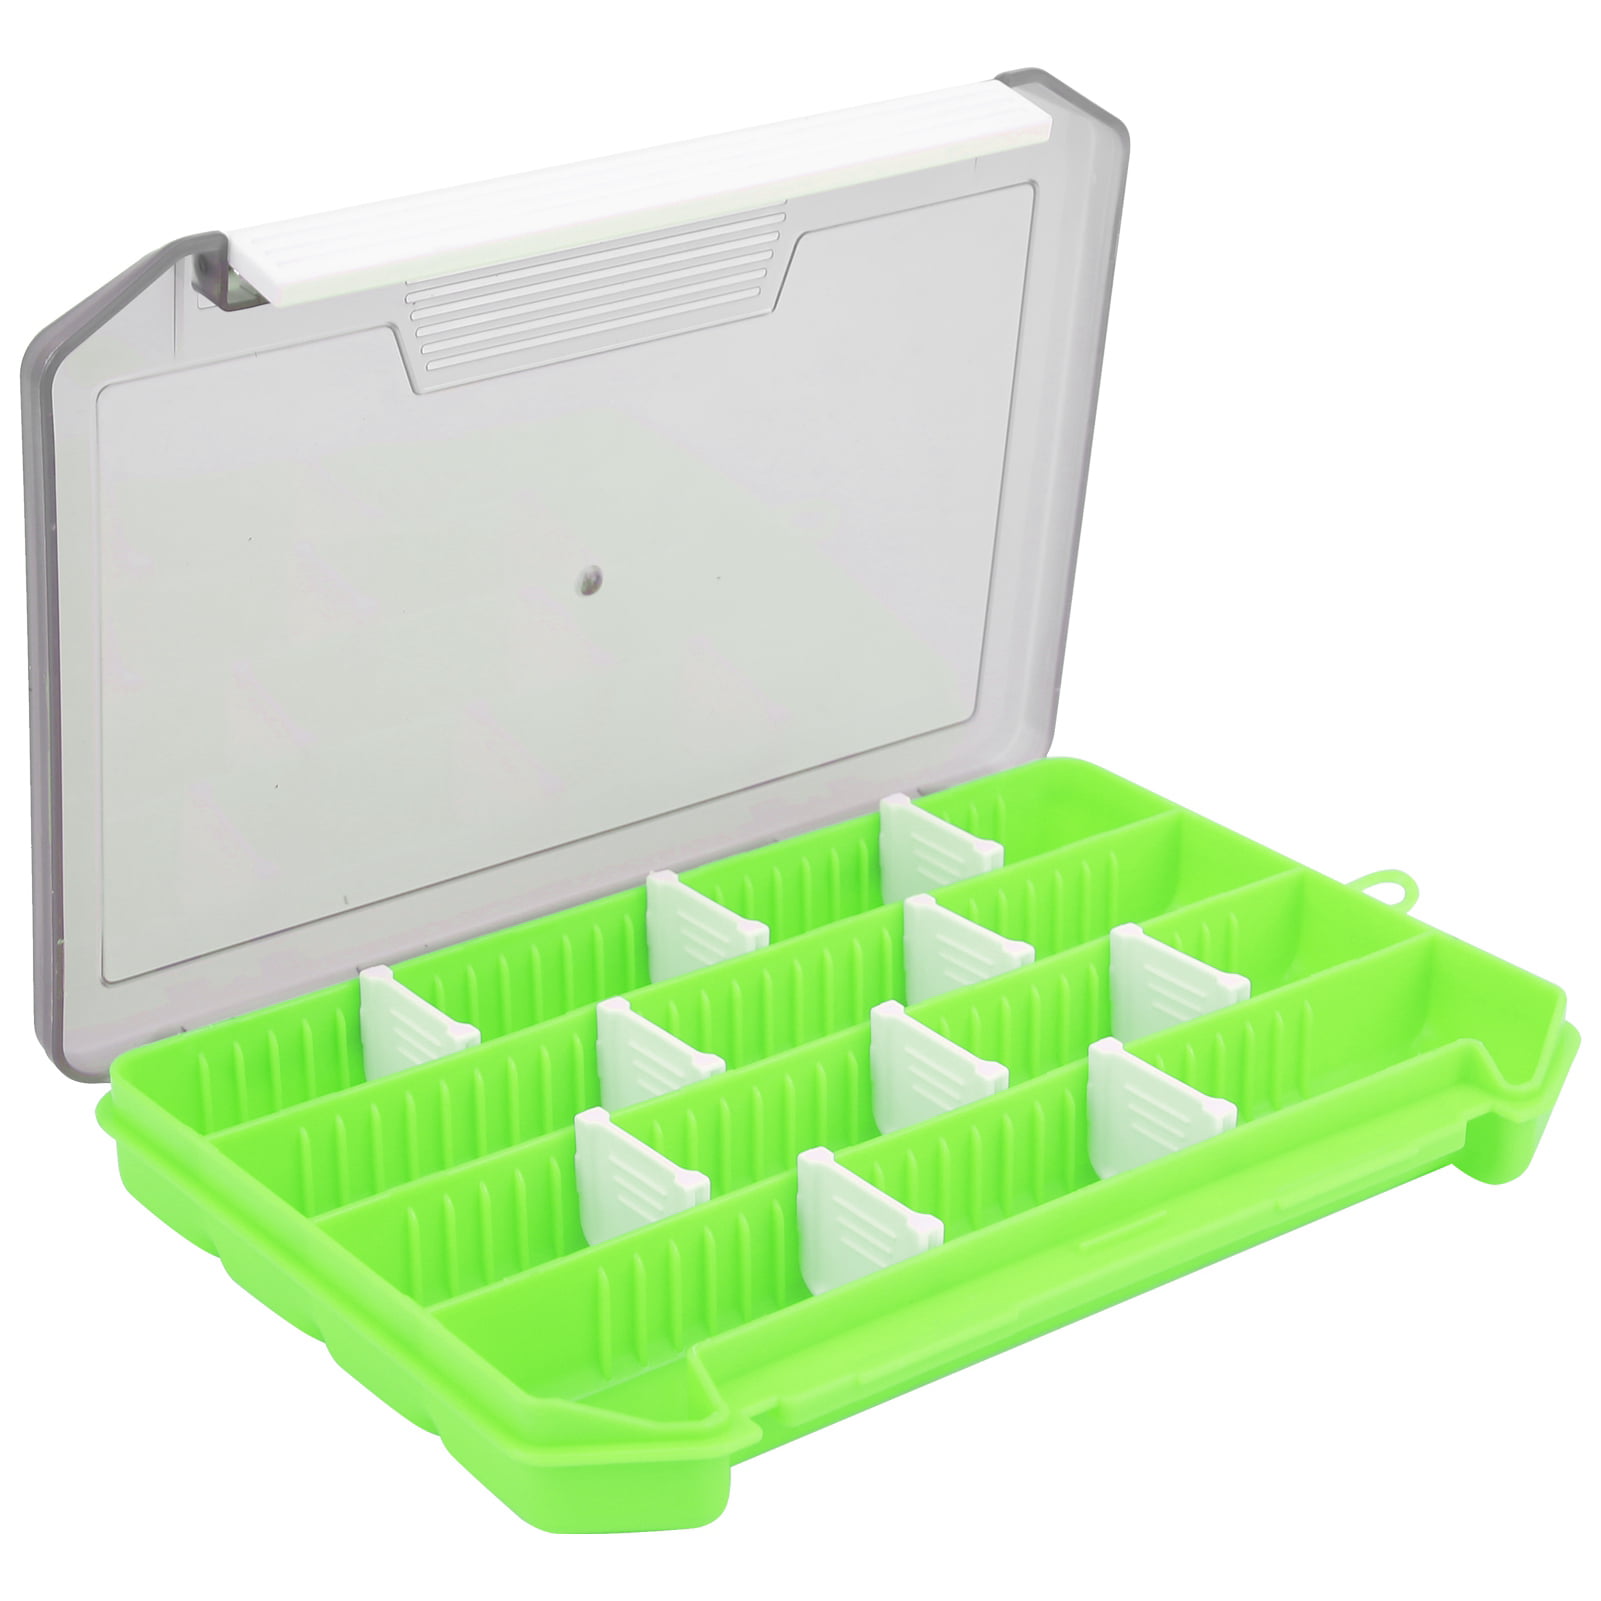 Fishing Tackle Lure Baits Box Single Layer Insert Lure Box Fake Bait  Storage with Removable Dividers for Fishing Tackle Storage[绿色] 